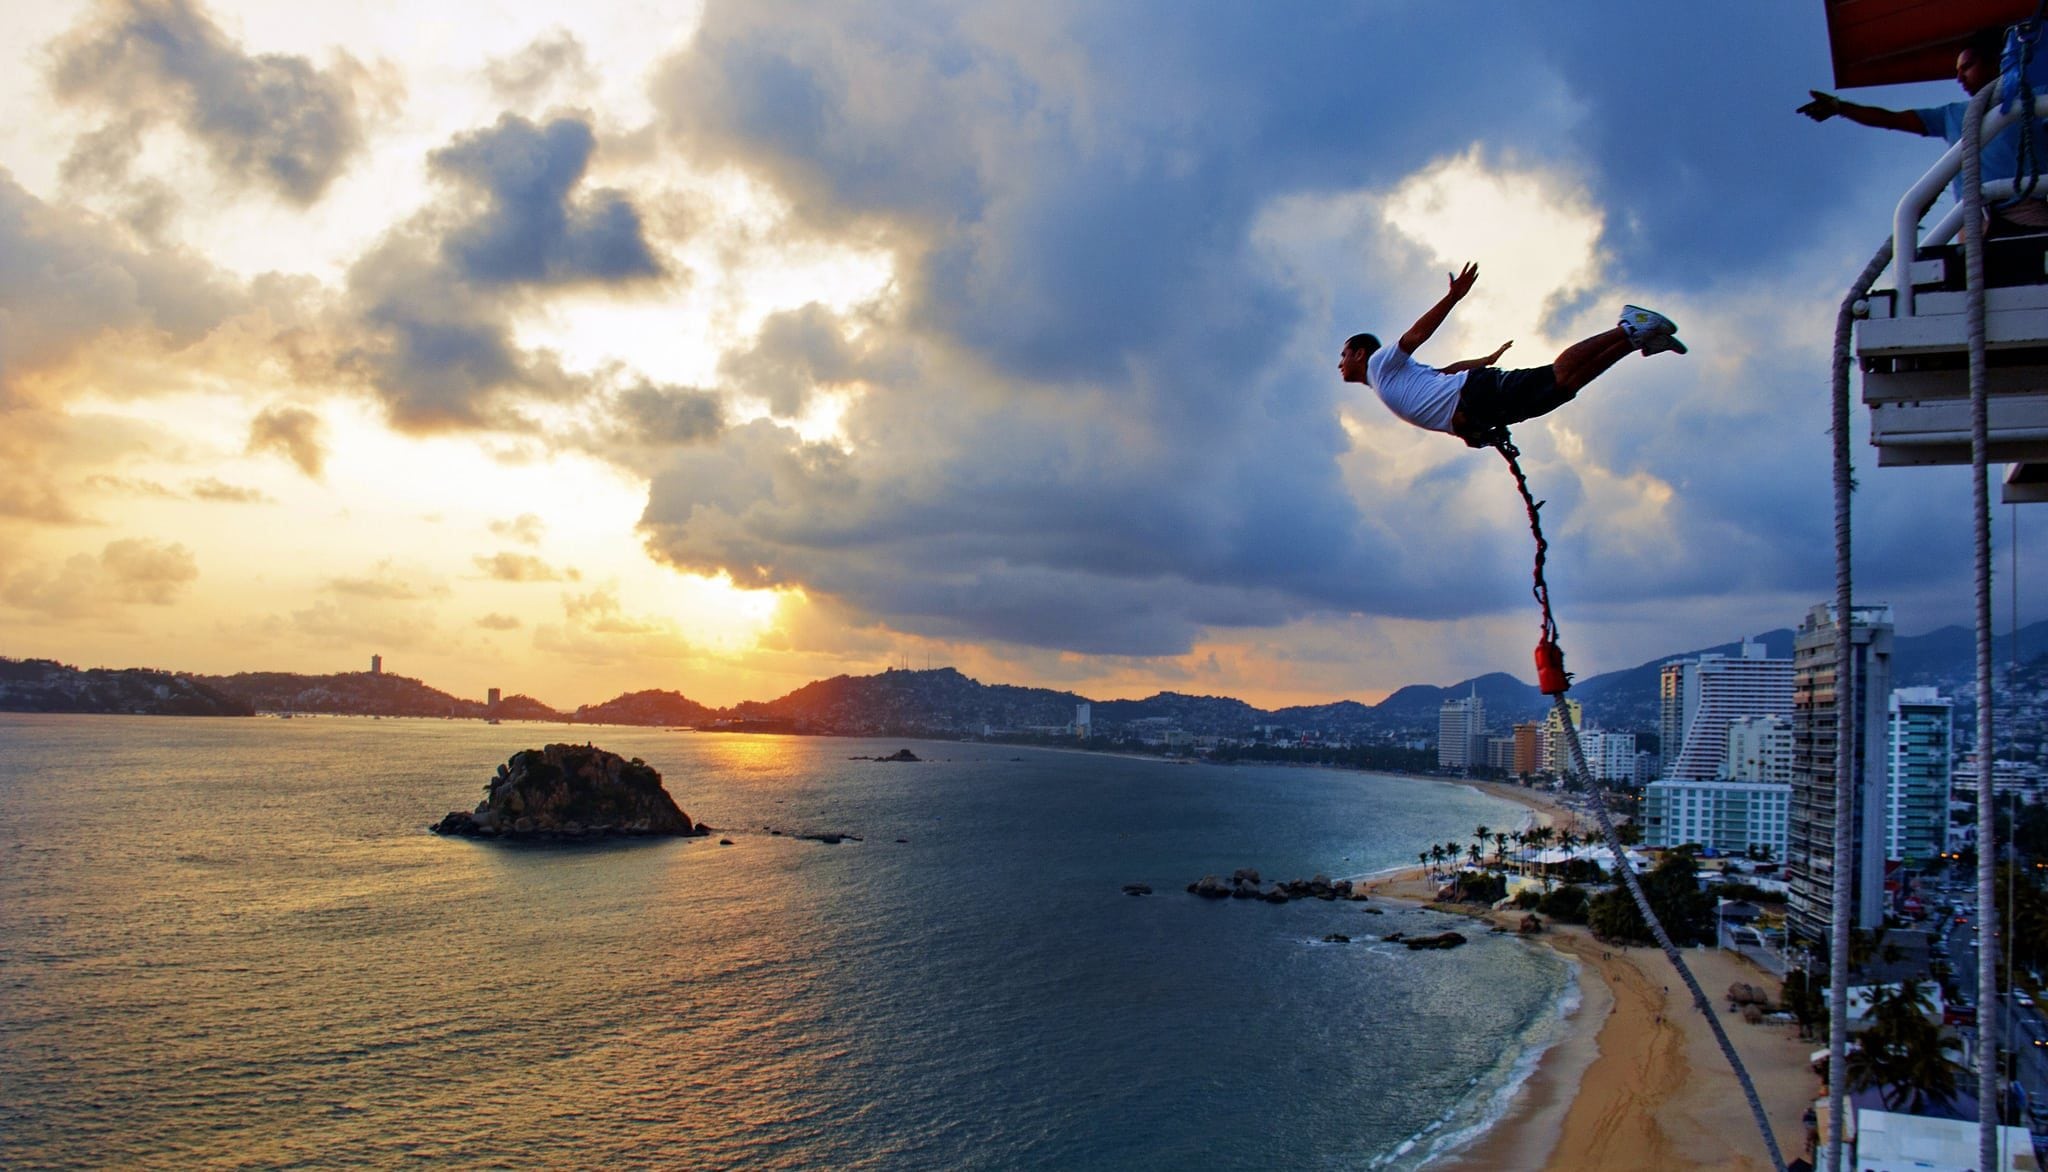 A tourist bungee jumps in Acapulco on October 18, 2012. Acapulco has been hard hit by crime and violence in recent years, seriously damaging its tourism industry. 